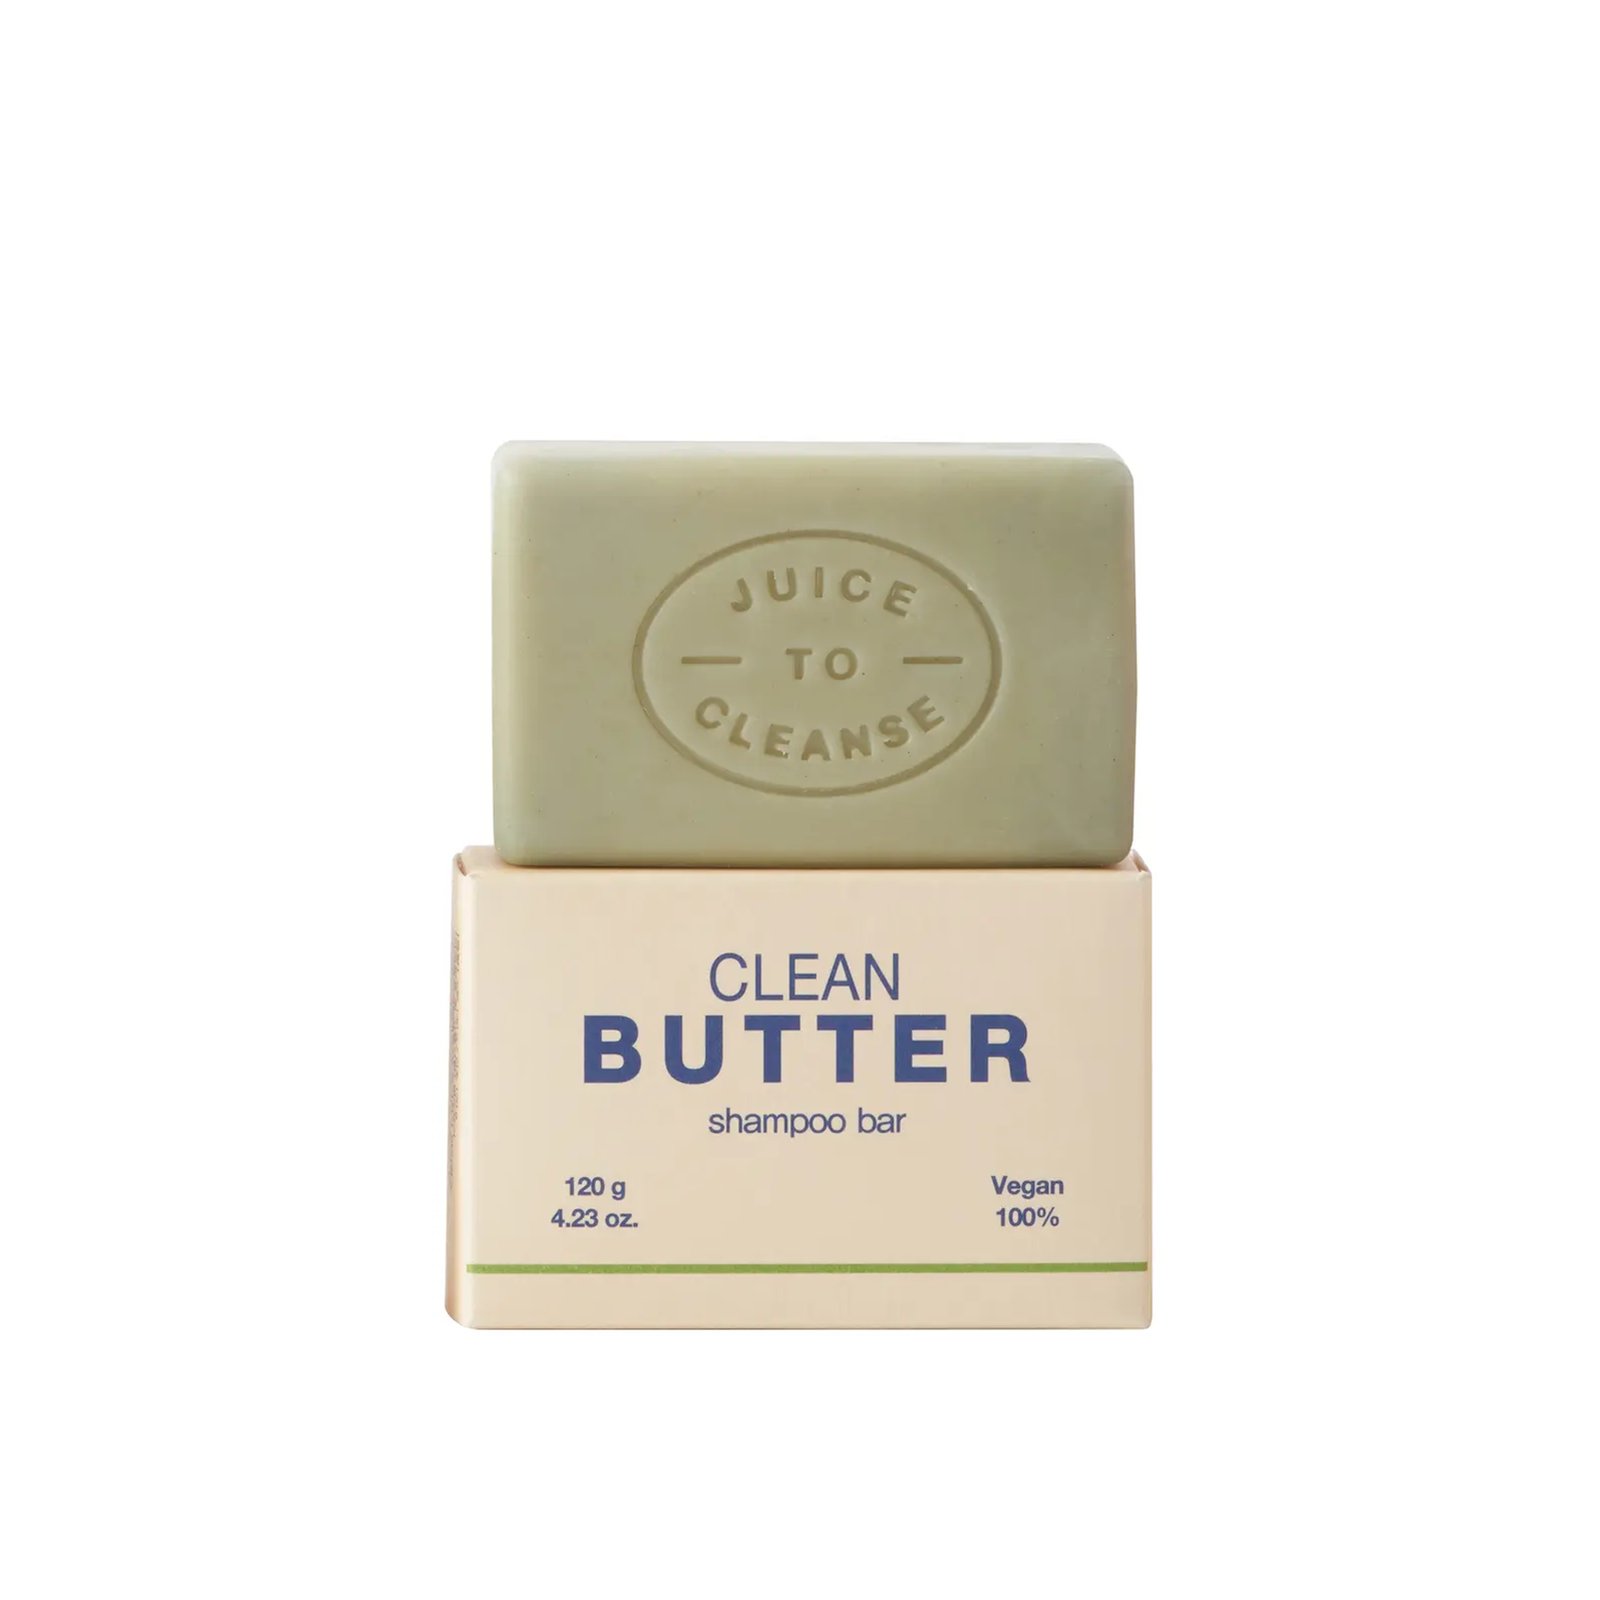 Juice to Cleanse Clean Butter Shampoo Bar 120g (4.23 oz)